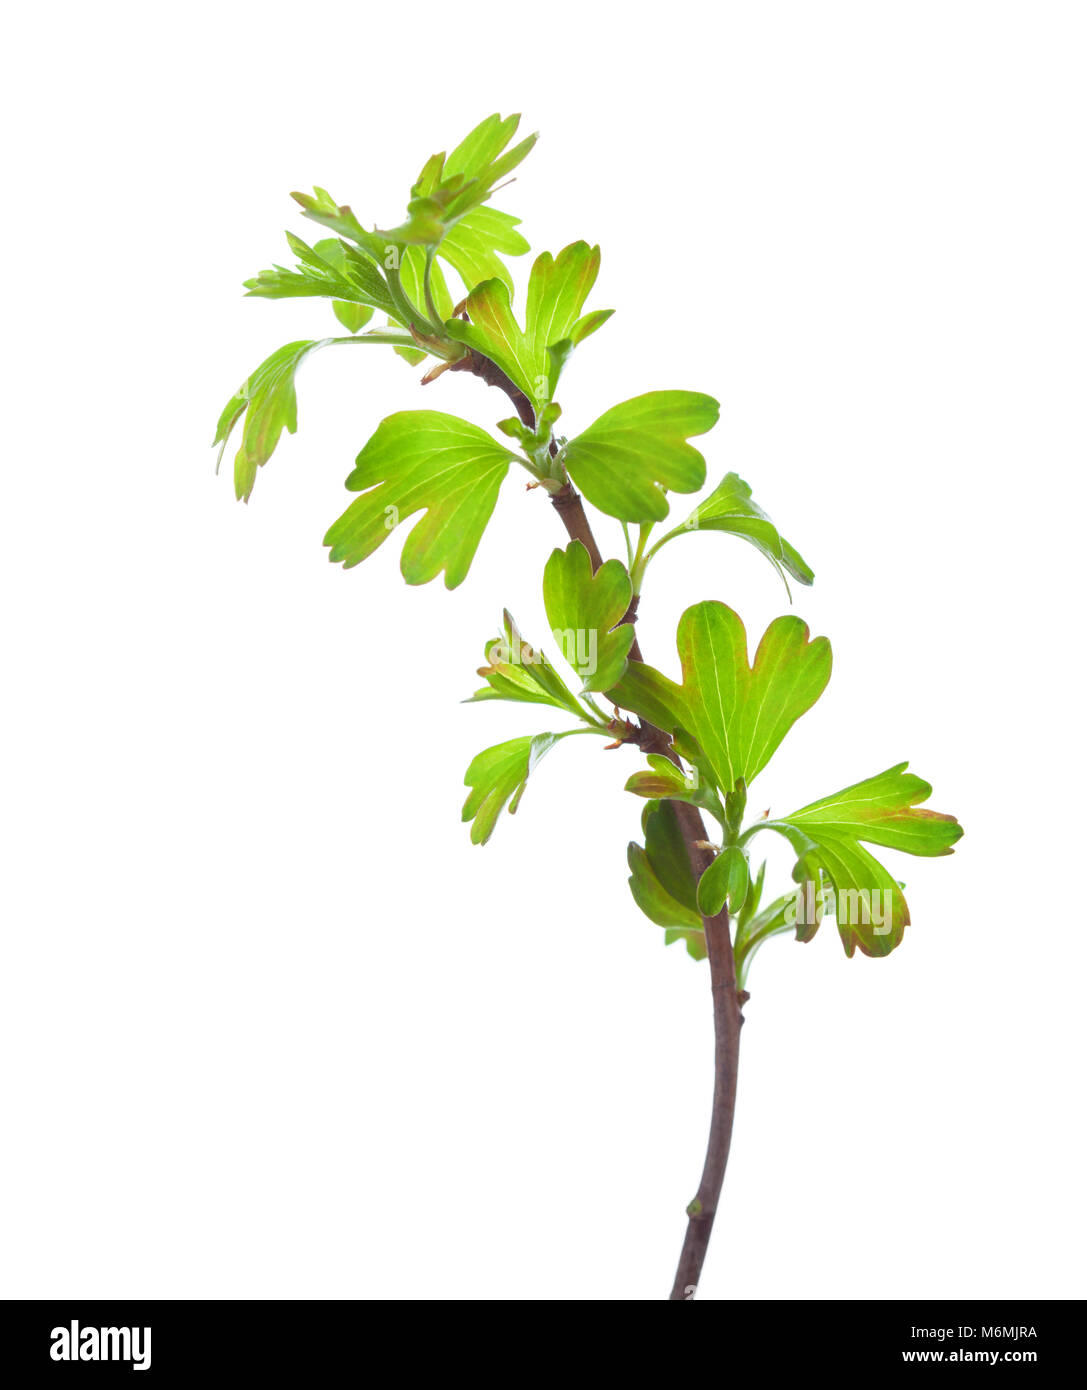 Branch with young green spring leaves isolated on white background. Golden Currant Stock Photo